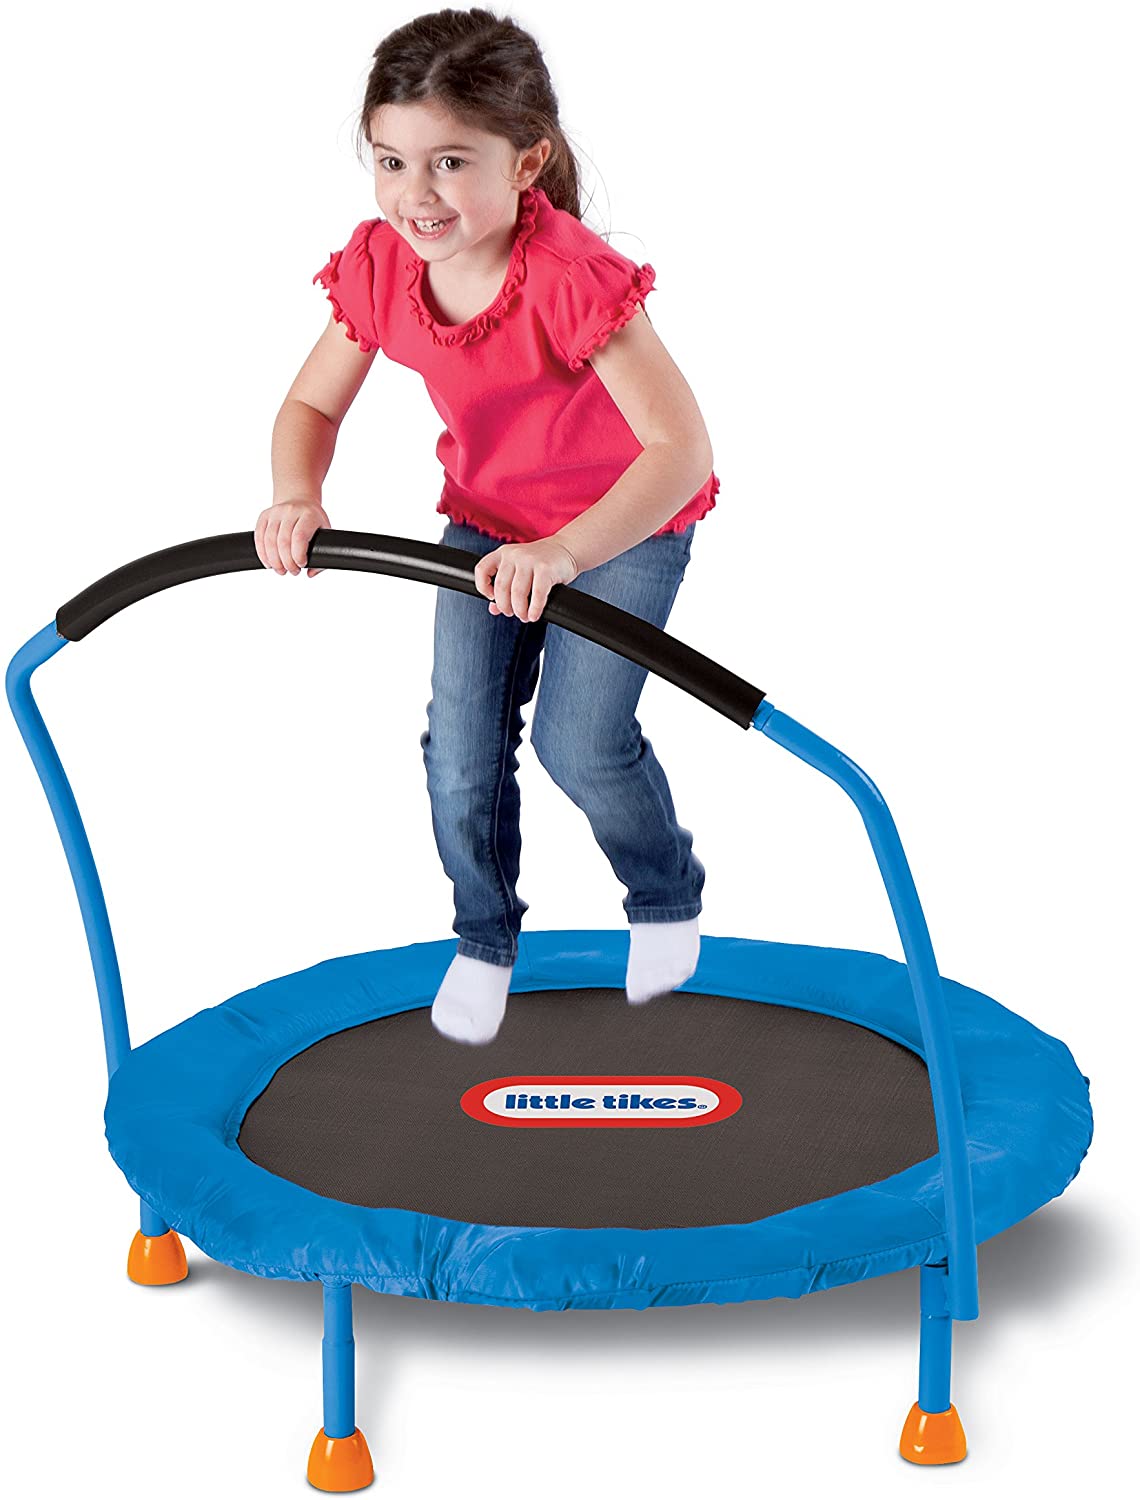 cheapest trampolines with net for sale